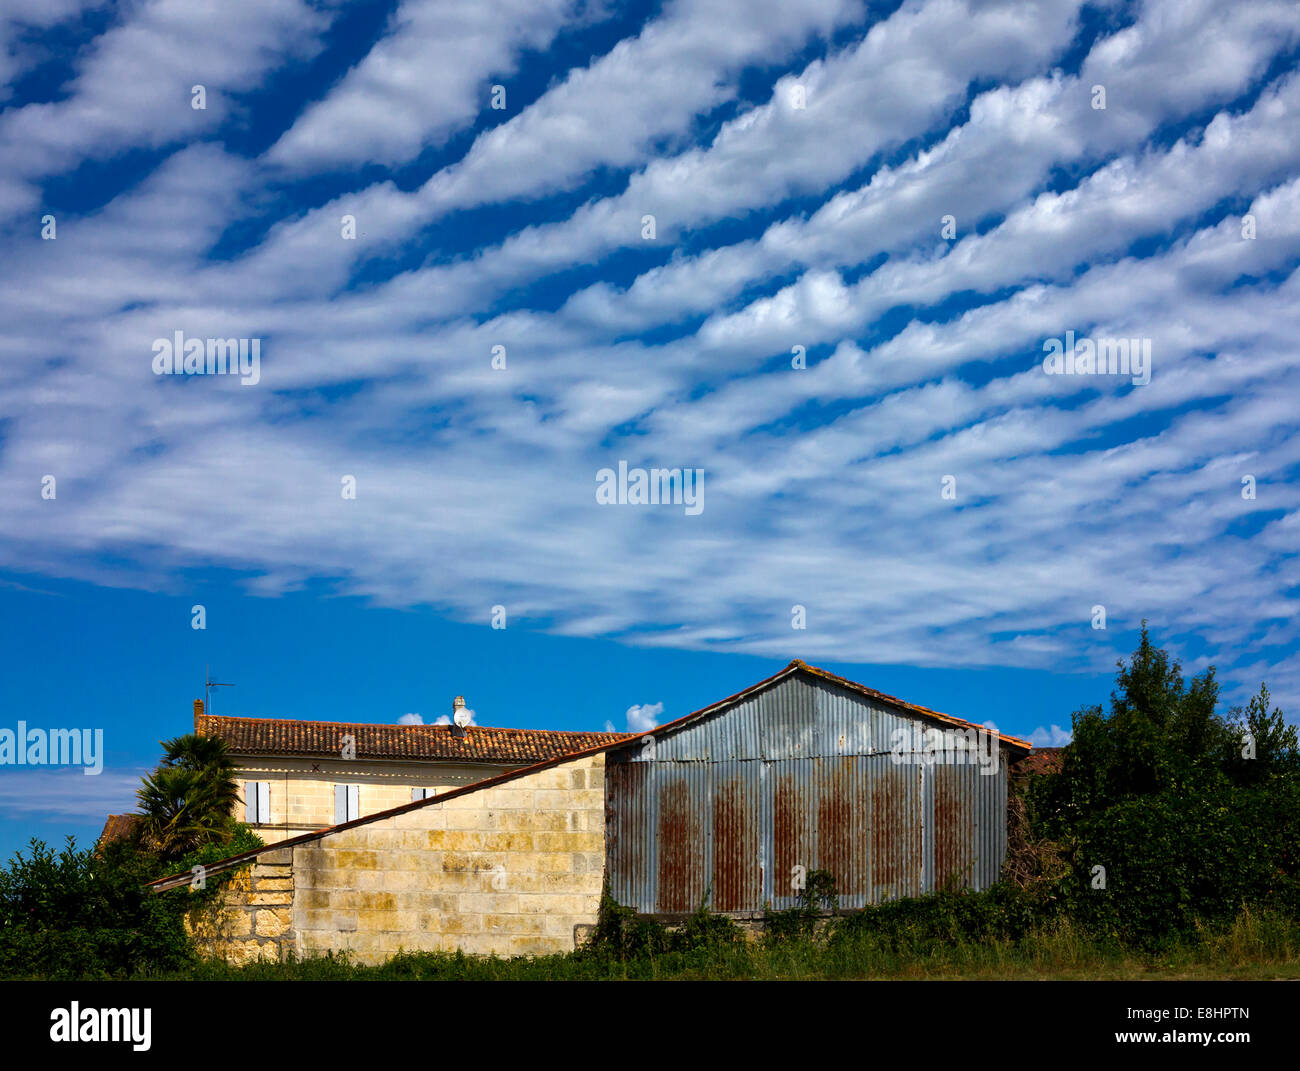 Cirrus clouds in a typical striped pattern against a blue sky with farm buildings below Stock Photo